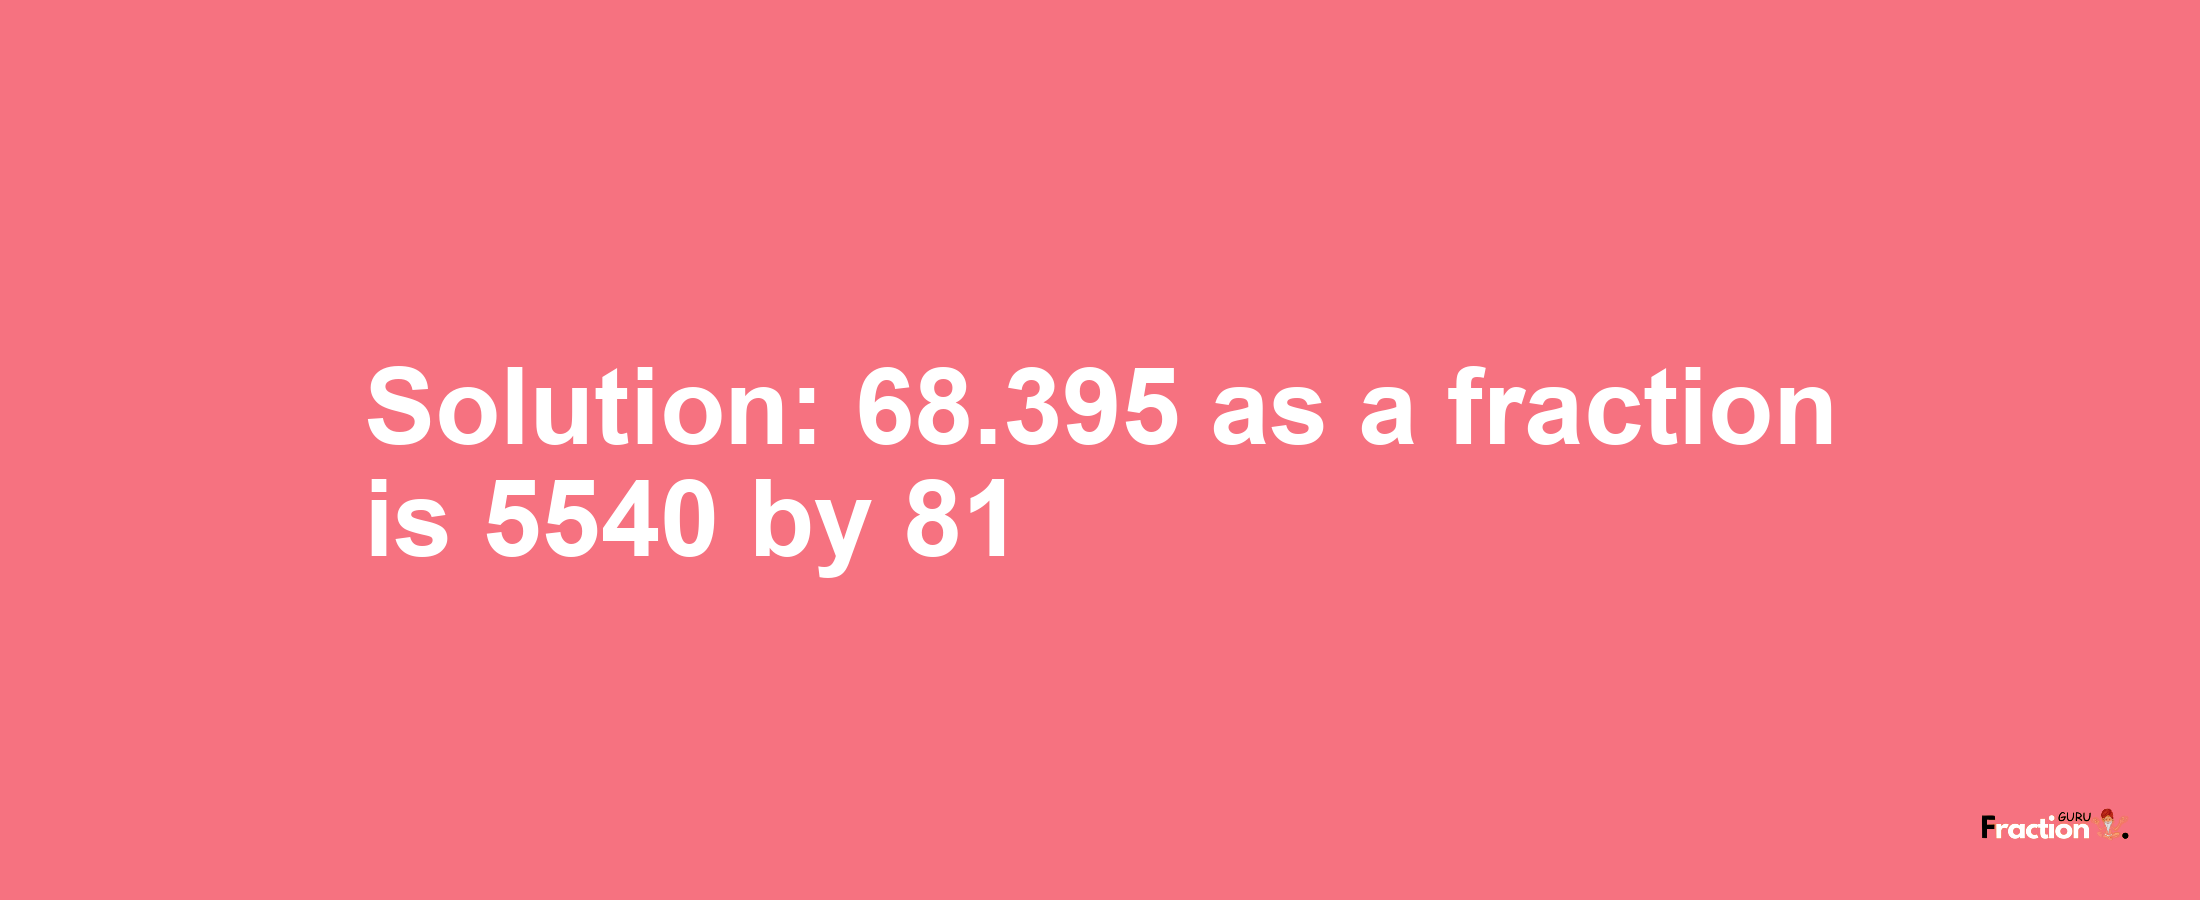 Solution:68.395 as a fraction is 5540/81